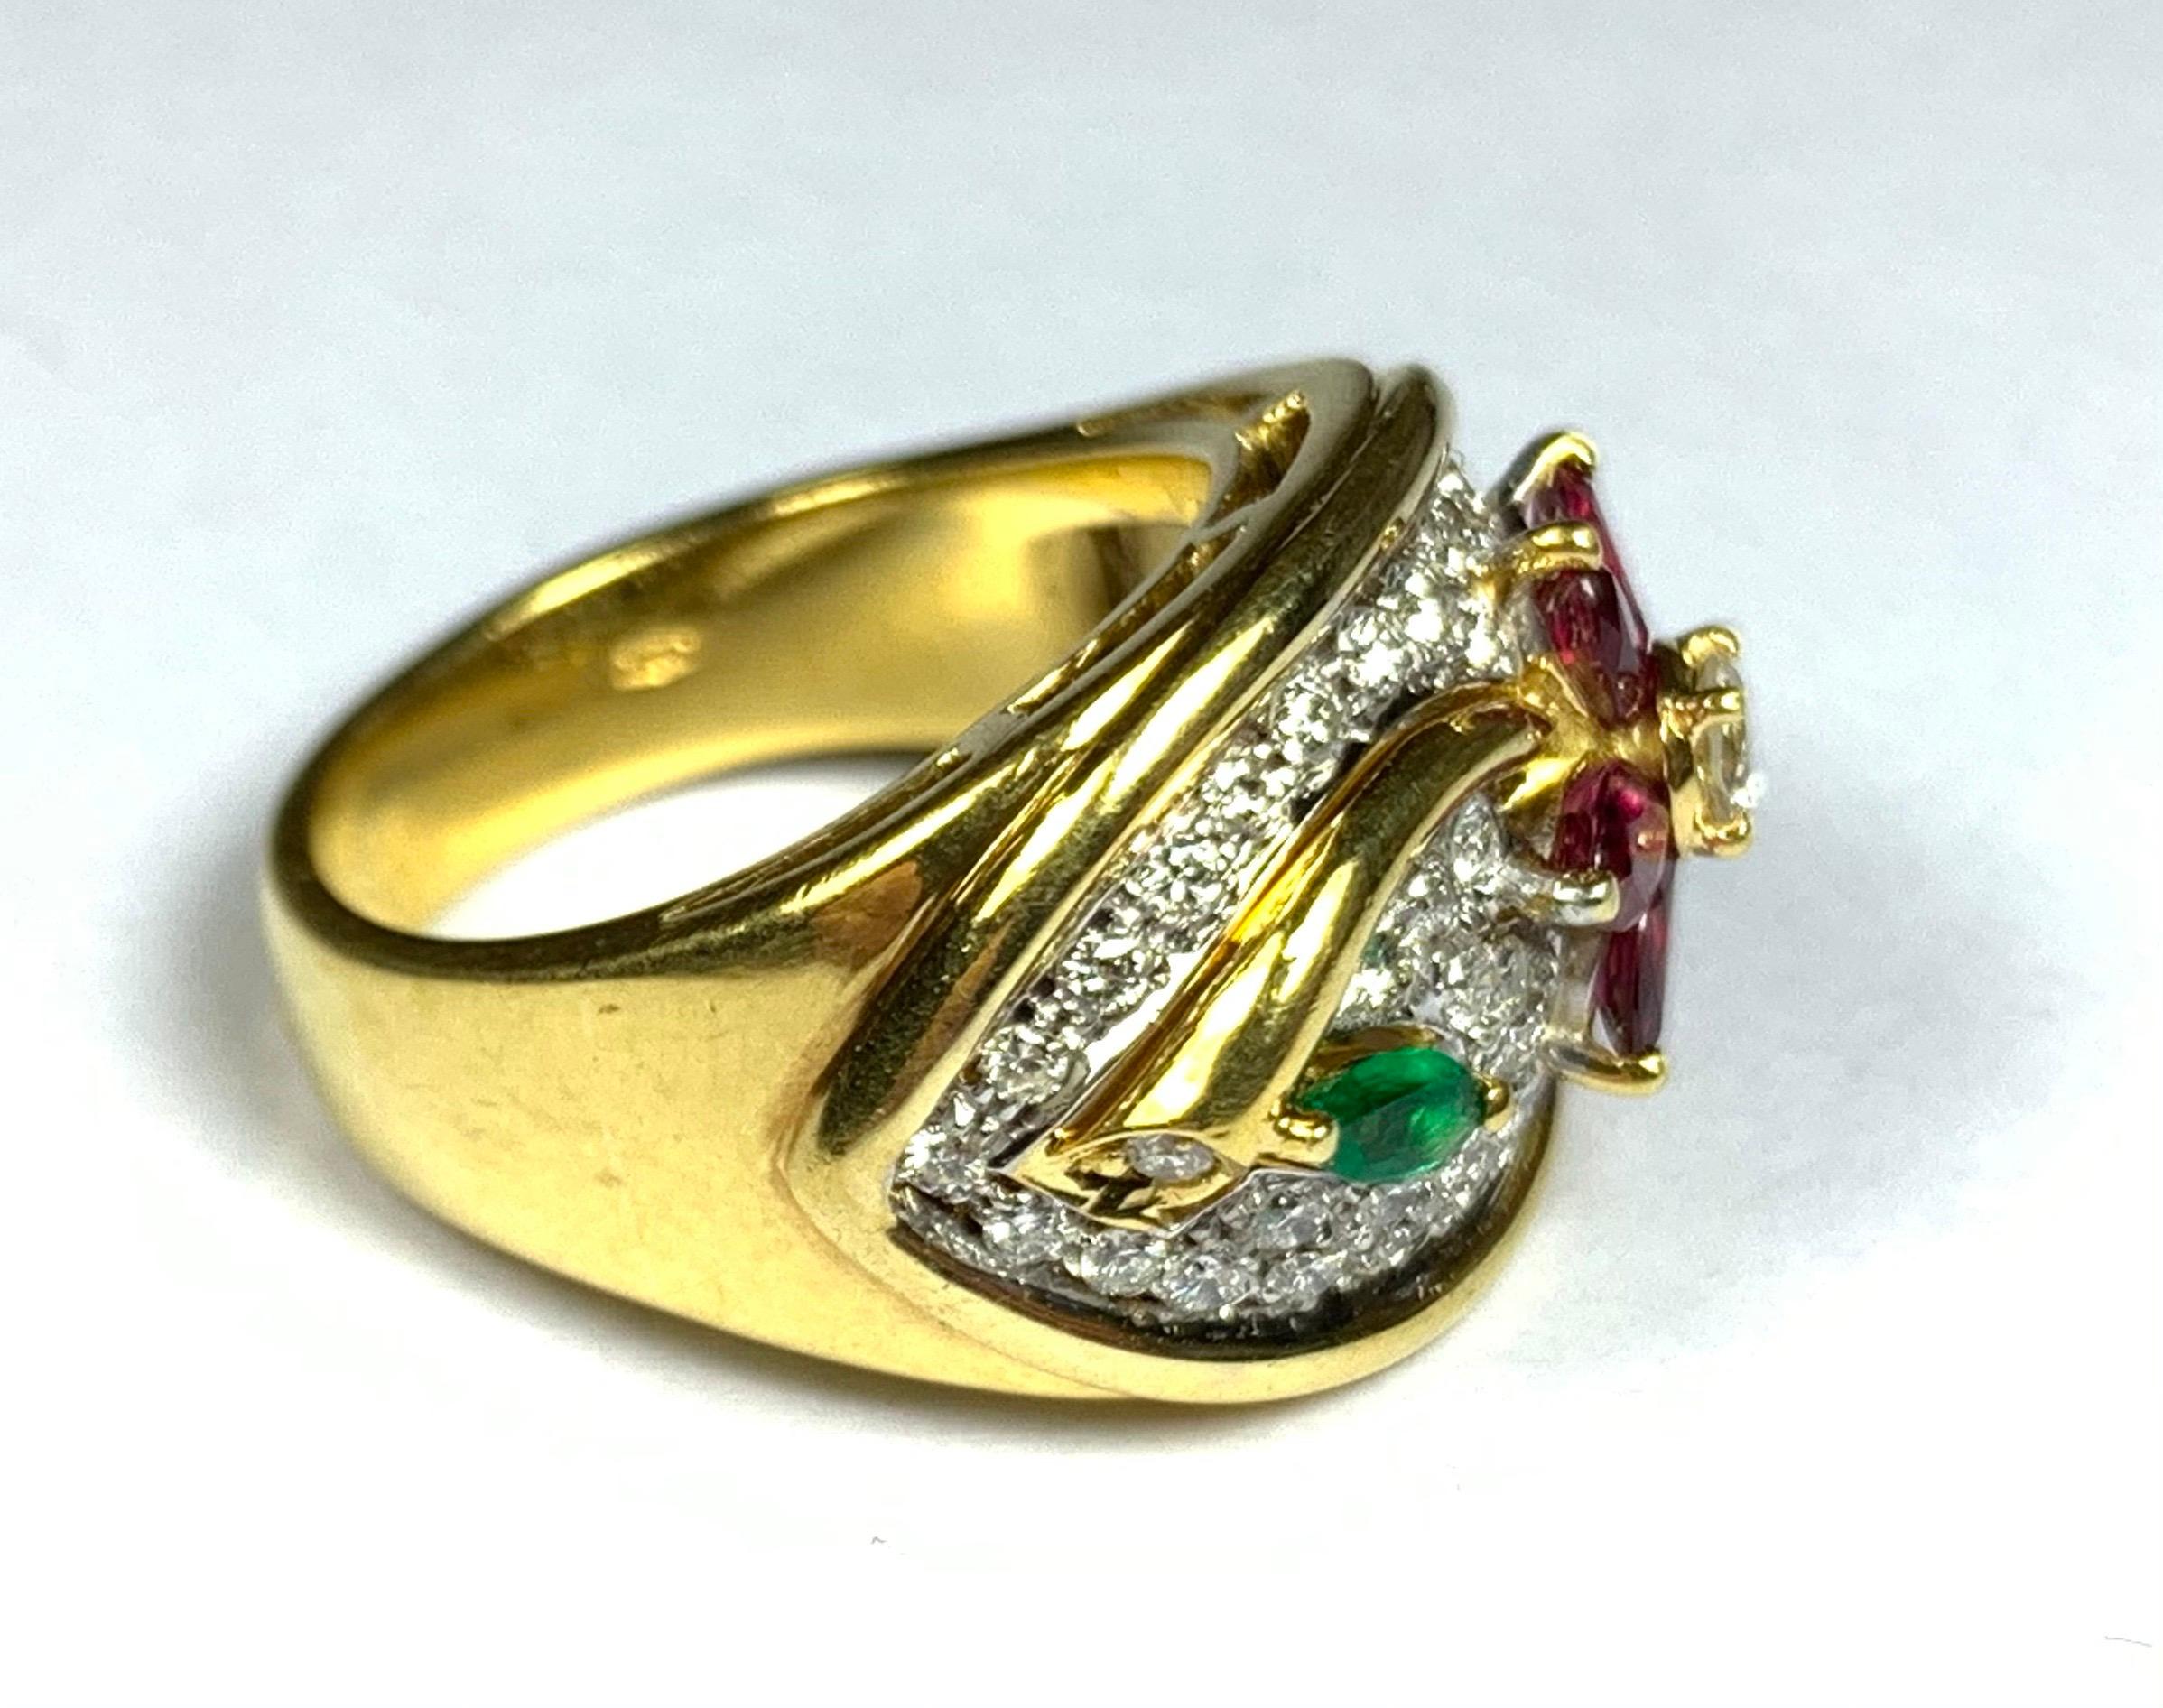 A striking 18ct yellow gold ring designed as a flower, set with diamonds, rubies and an emerald. Can be sized. Ring size 5 1/8.